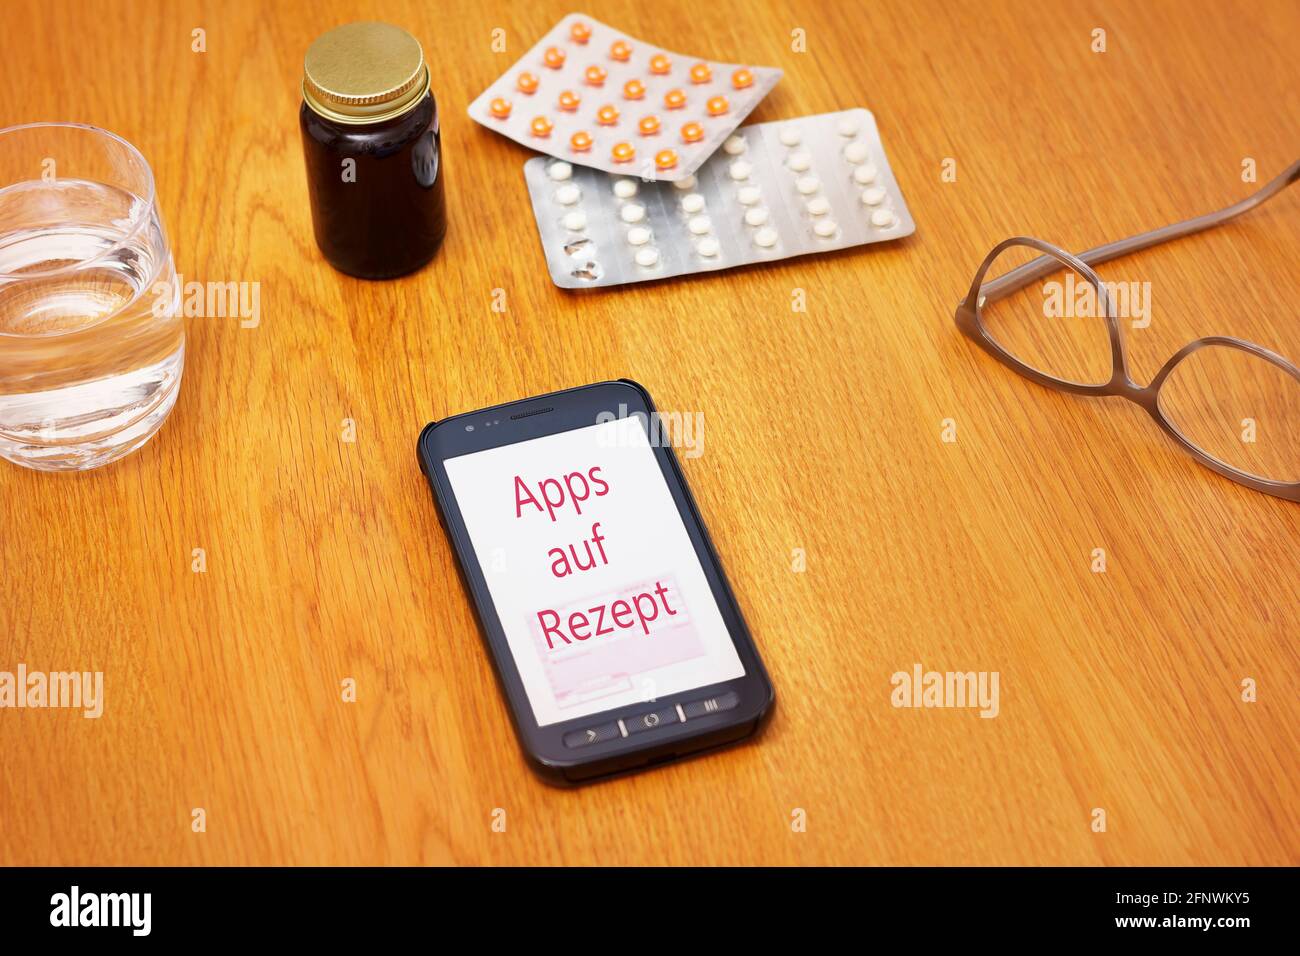 Medicine and smartphone on a table showing the german text: Apps auf Rezept. Translation: apps on prescription. Stock Photo